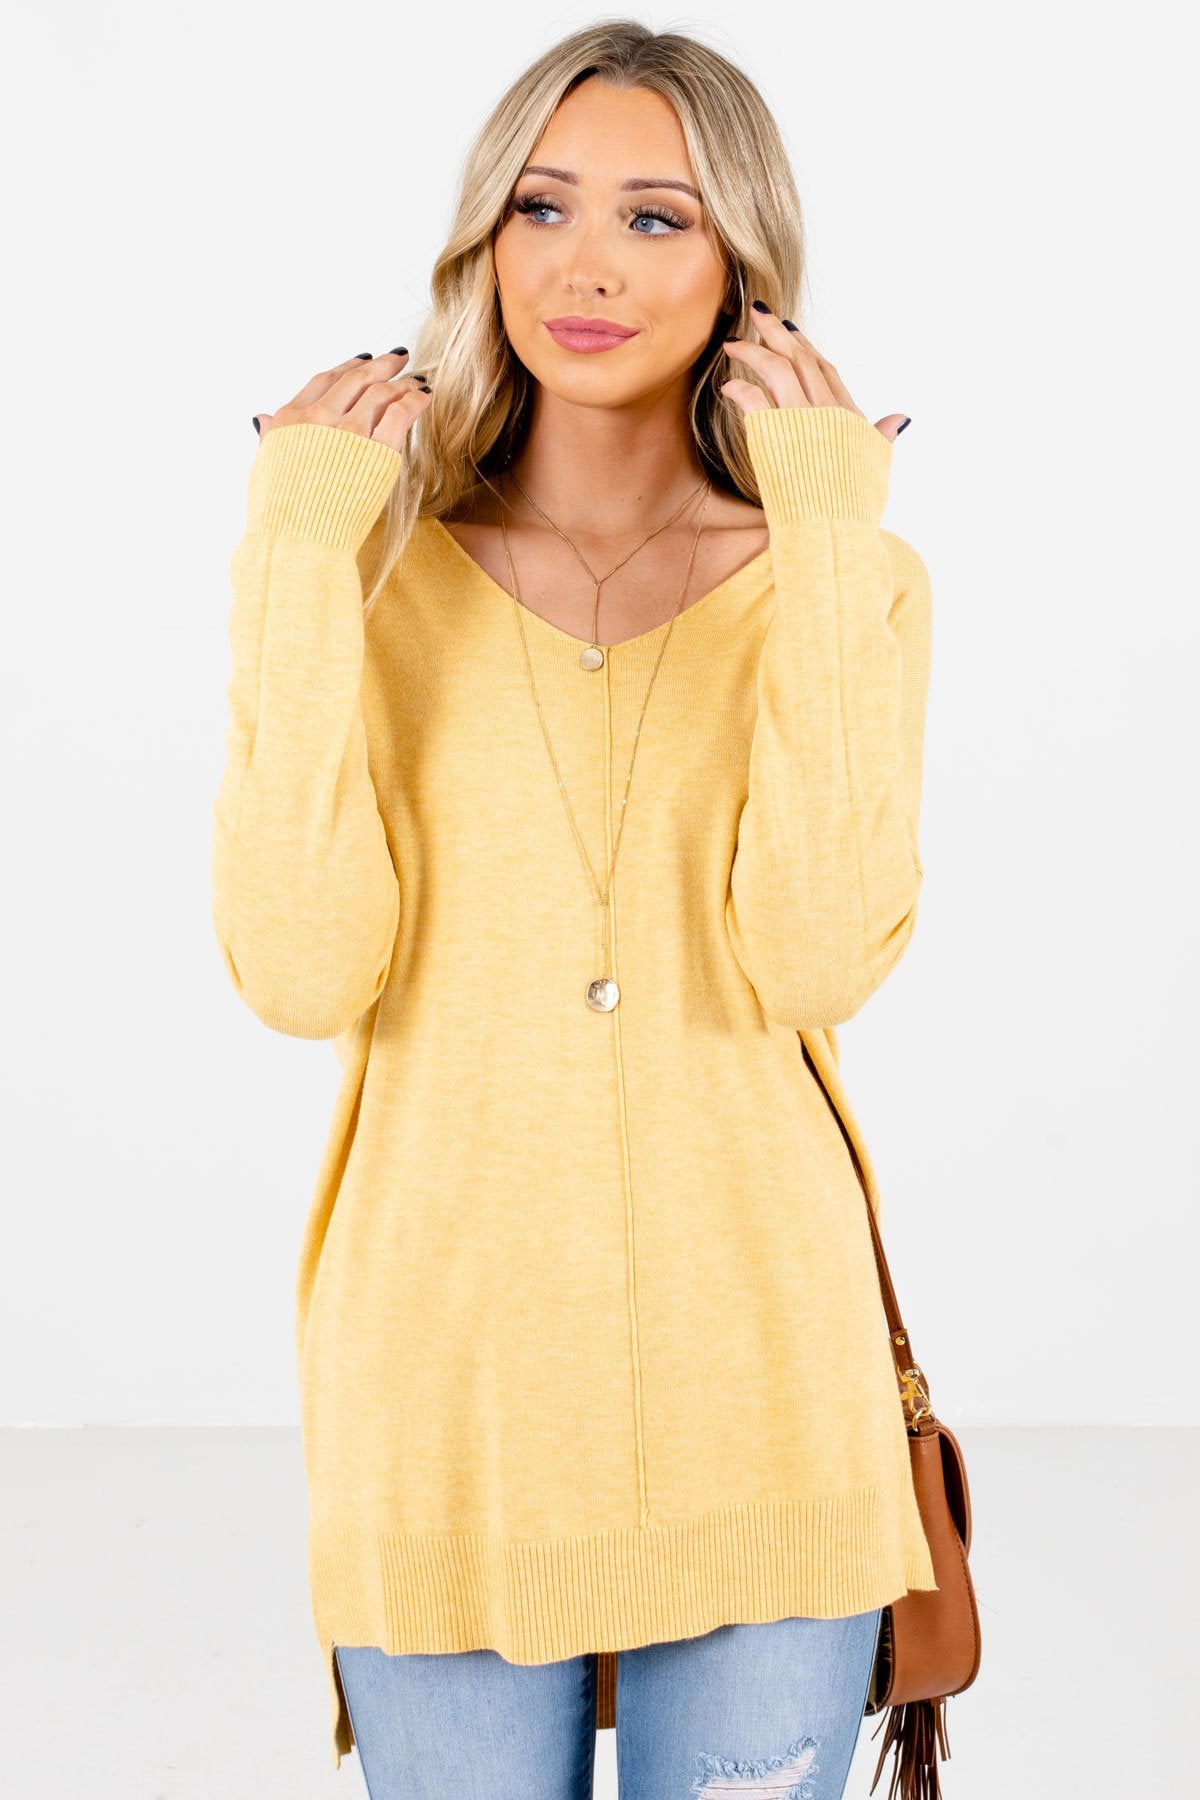 Women's Yellow Warm and Cozy Boutique Sweater